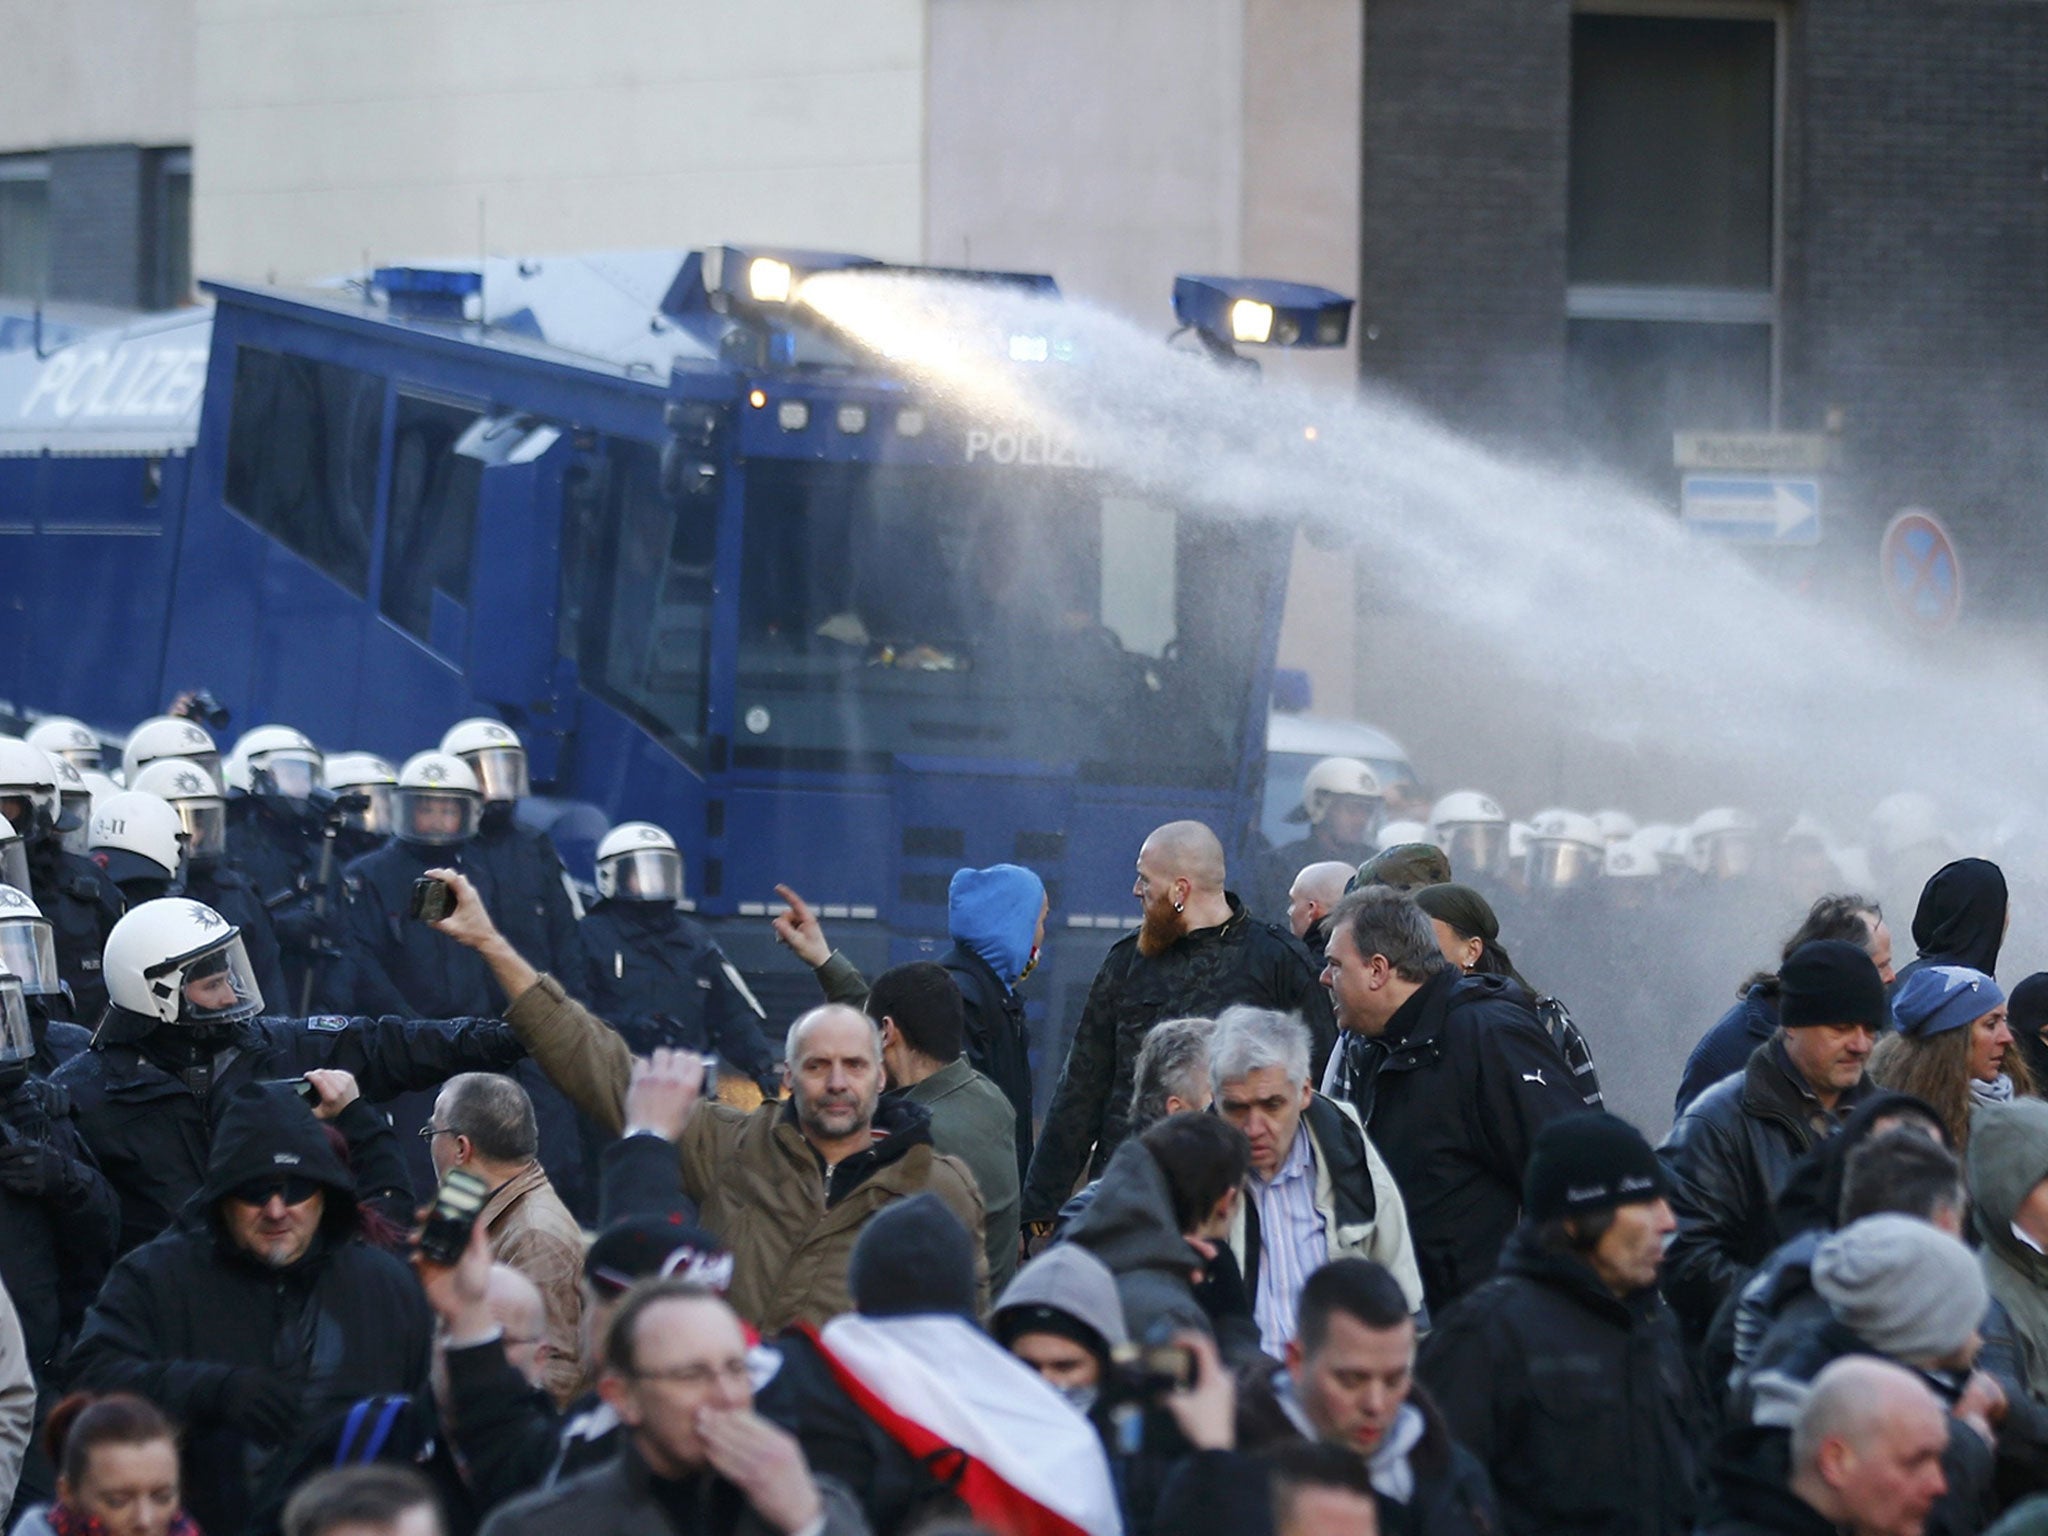 Police use a water cannon during a protest march by supporters of anti-immigration right-wing movement Pegida in Cologne on 9 January 2016